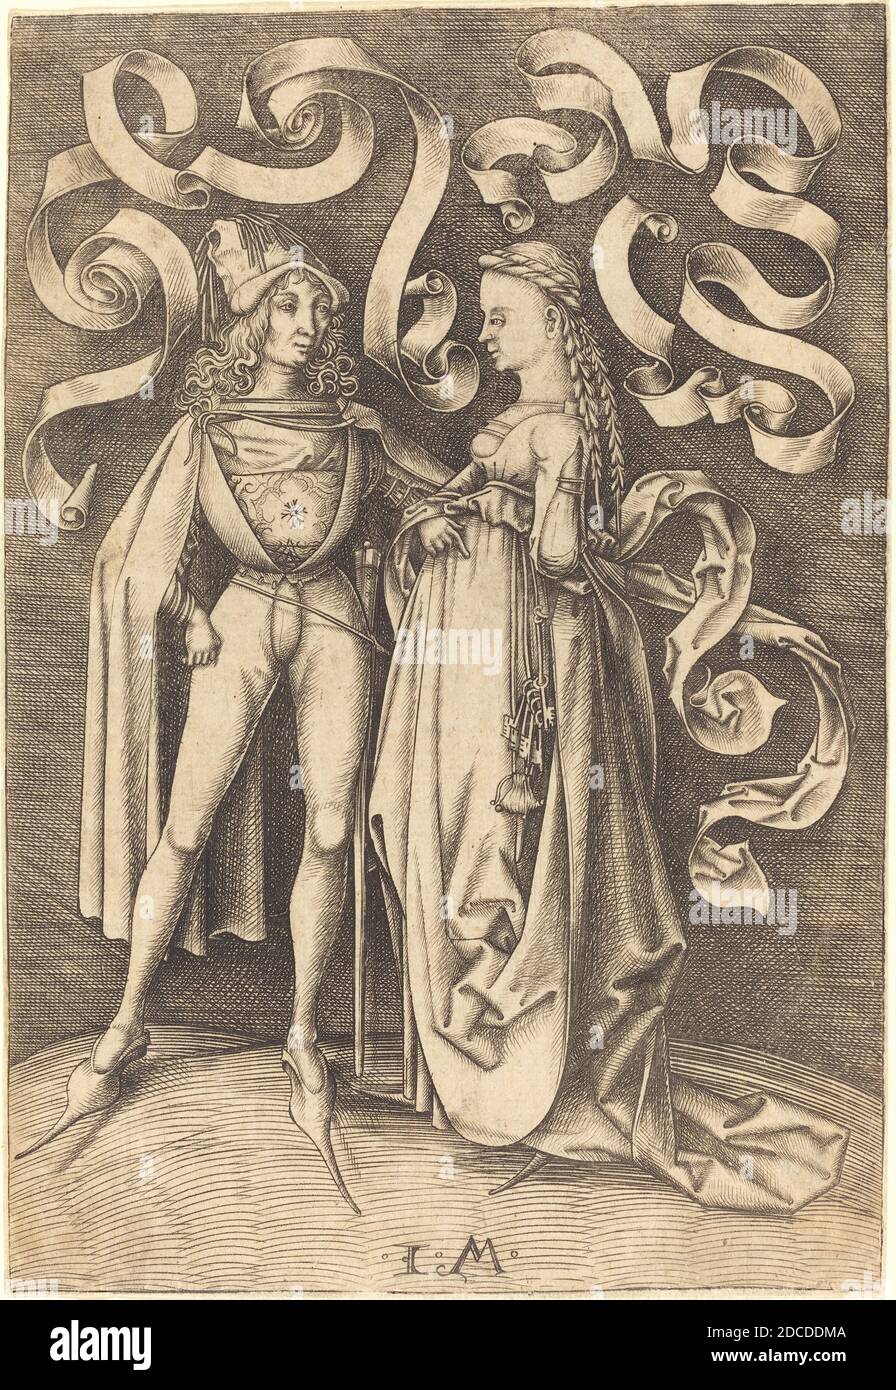 Israhel van Meckenem, (artist), German, c. 1445 - 1503, The Knight and the Lady, Scenes of Daily Life, (series), c. 1495/1503, engraving Stock Photo